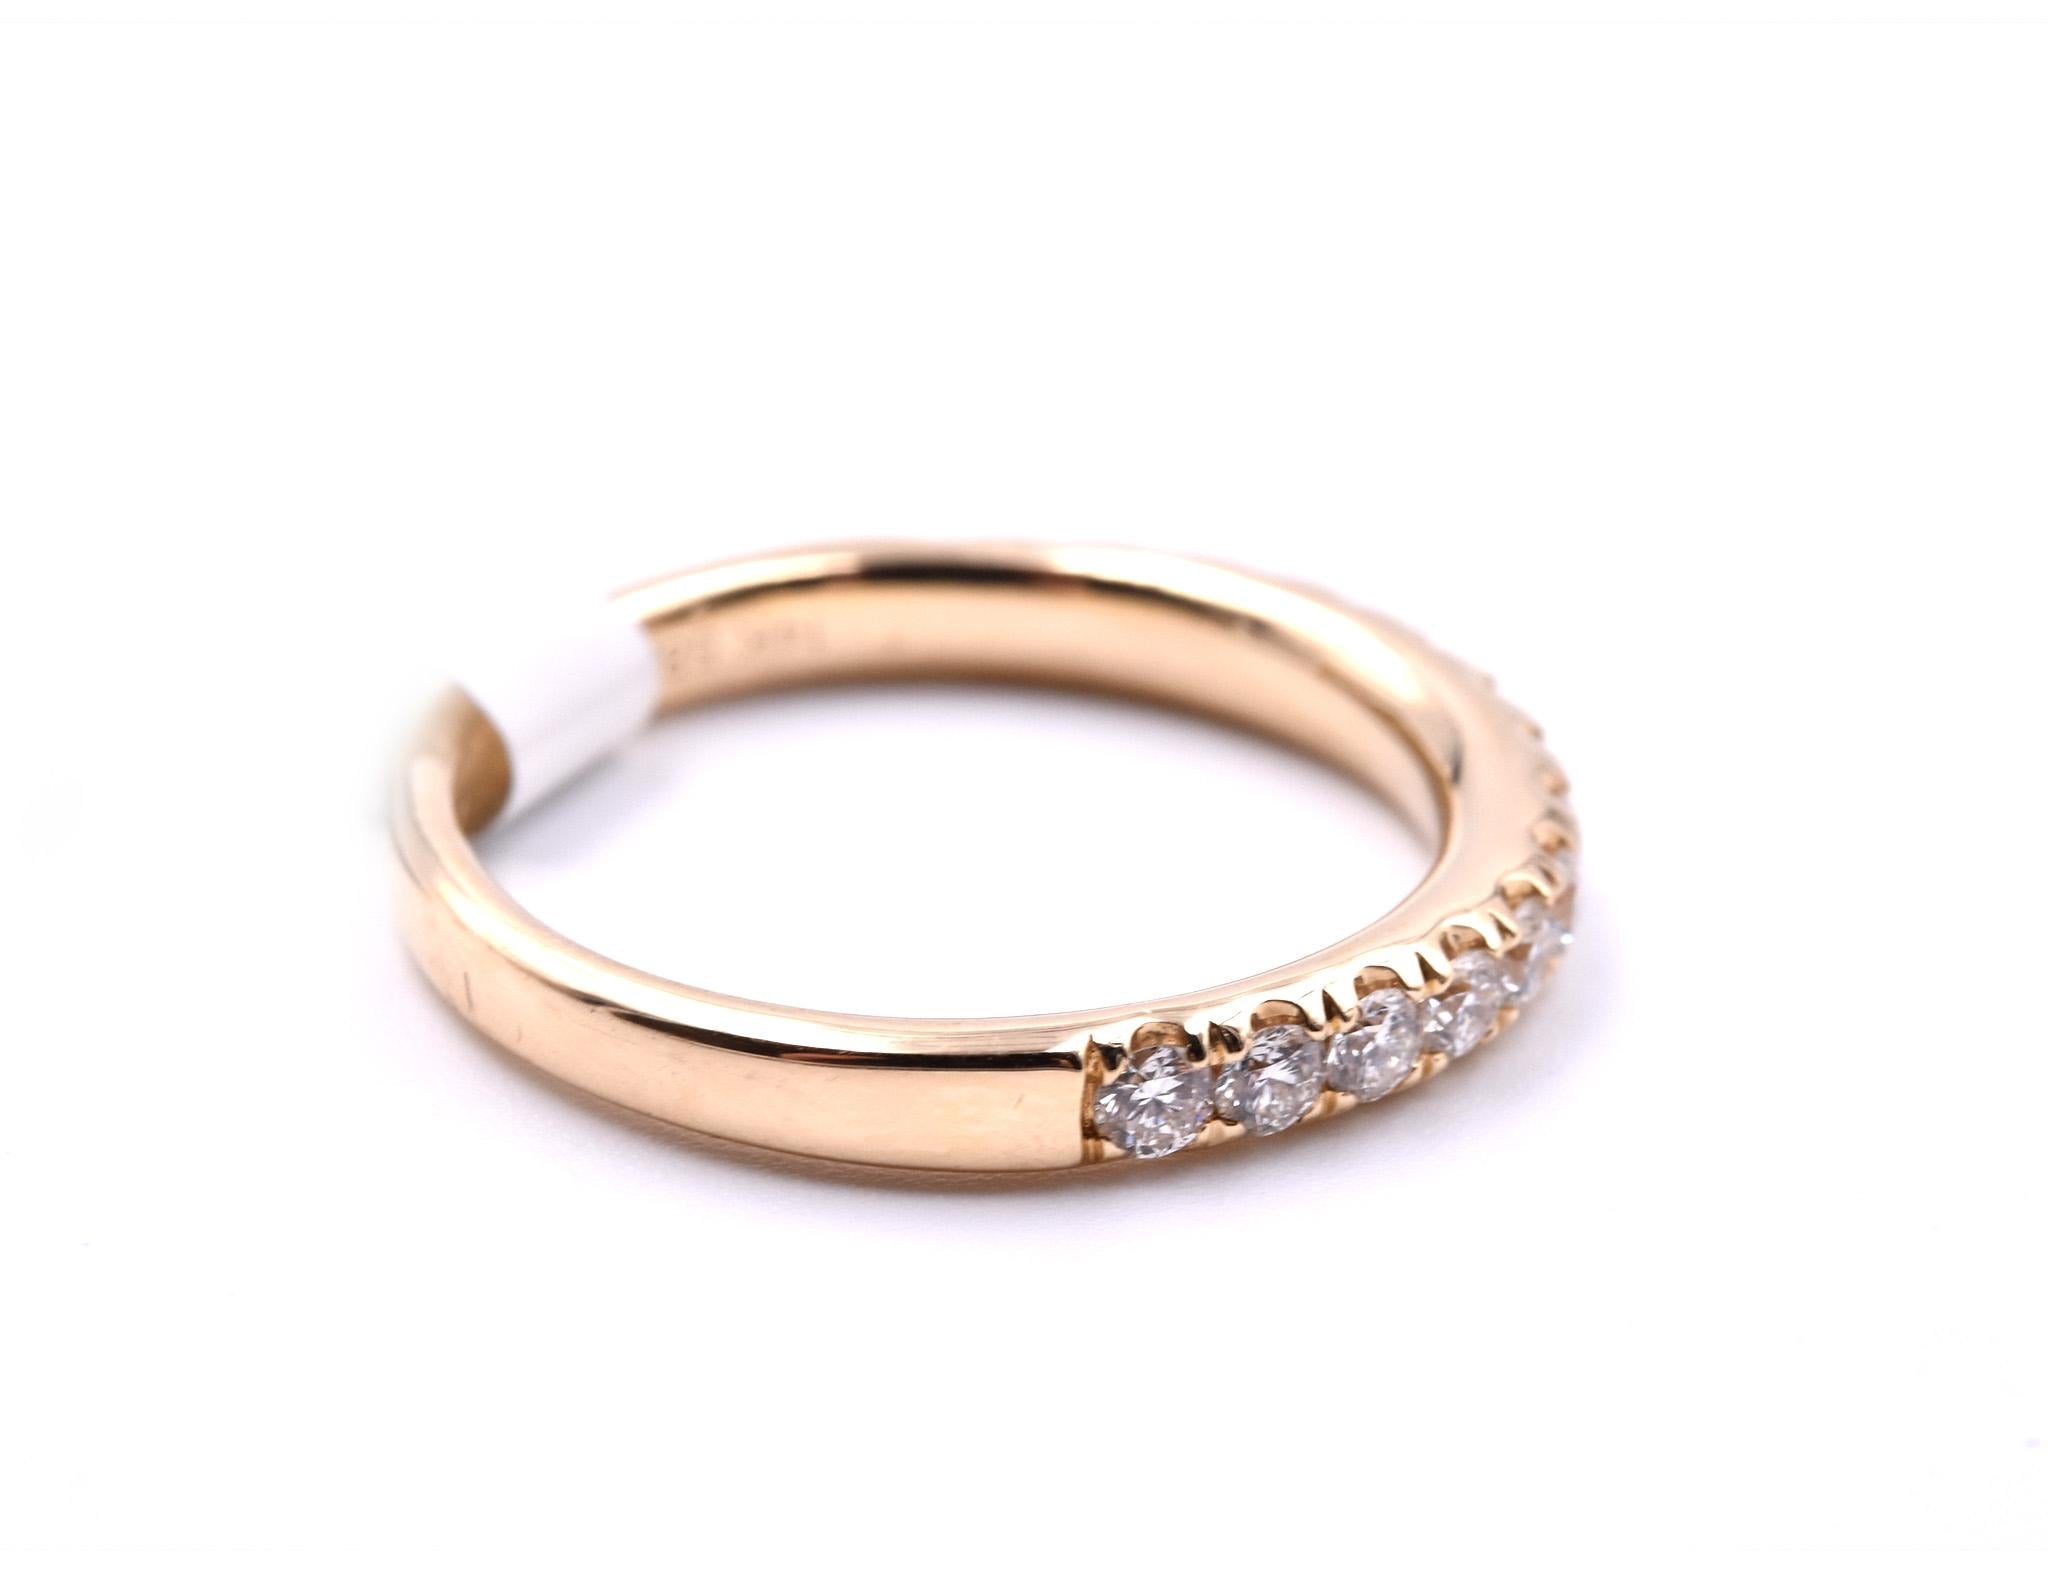 Designer: custom design
Material: 14k yellow gold
Diamonds: 15 round brilliant cut = .51cttw
Color: G
Clarity: VS
Ring size: 6 ½ (please allow two additional shipping days for sizing requests) 
Weight: 1.80 grams 
